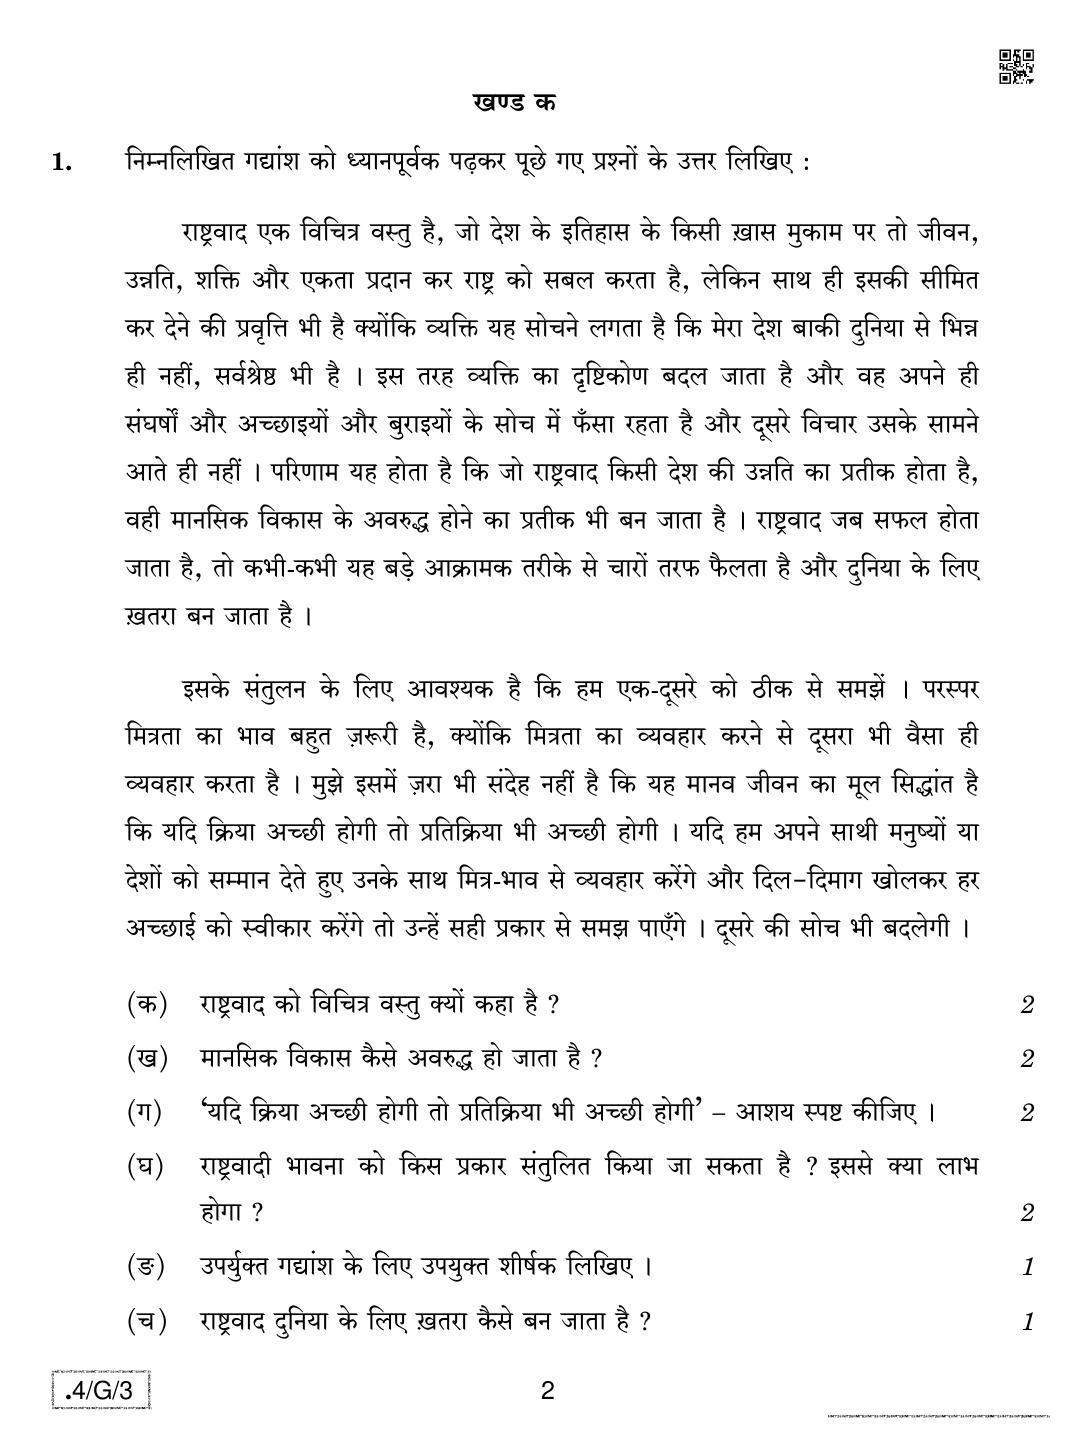 CBSE Class 10 4-C-3 Hindi B 2020 Compartment Question Paper - Page 2